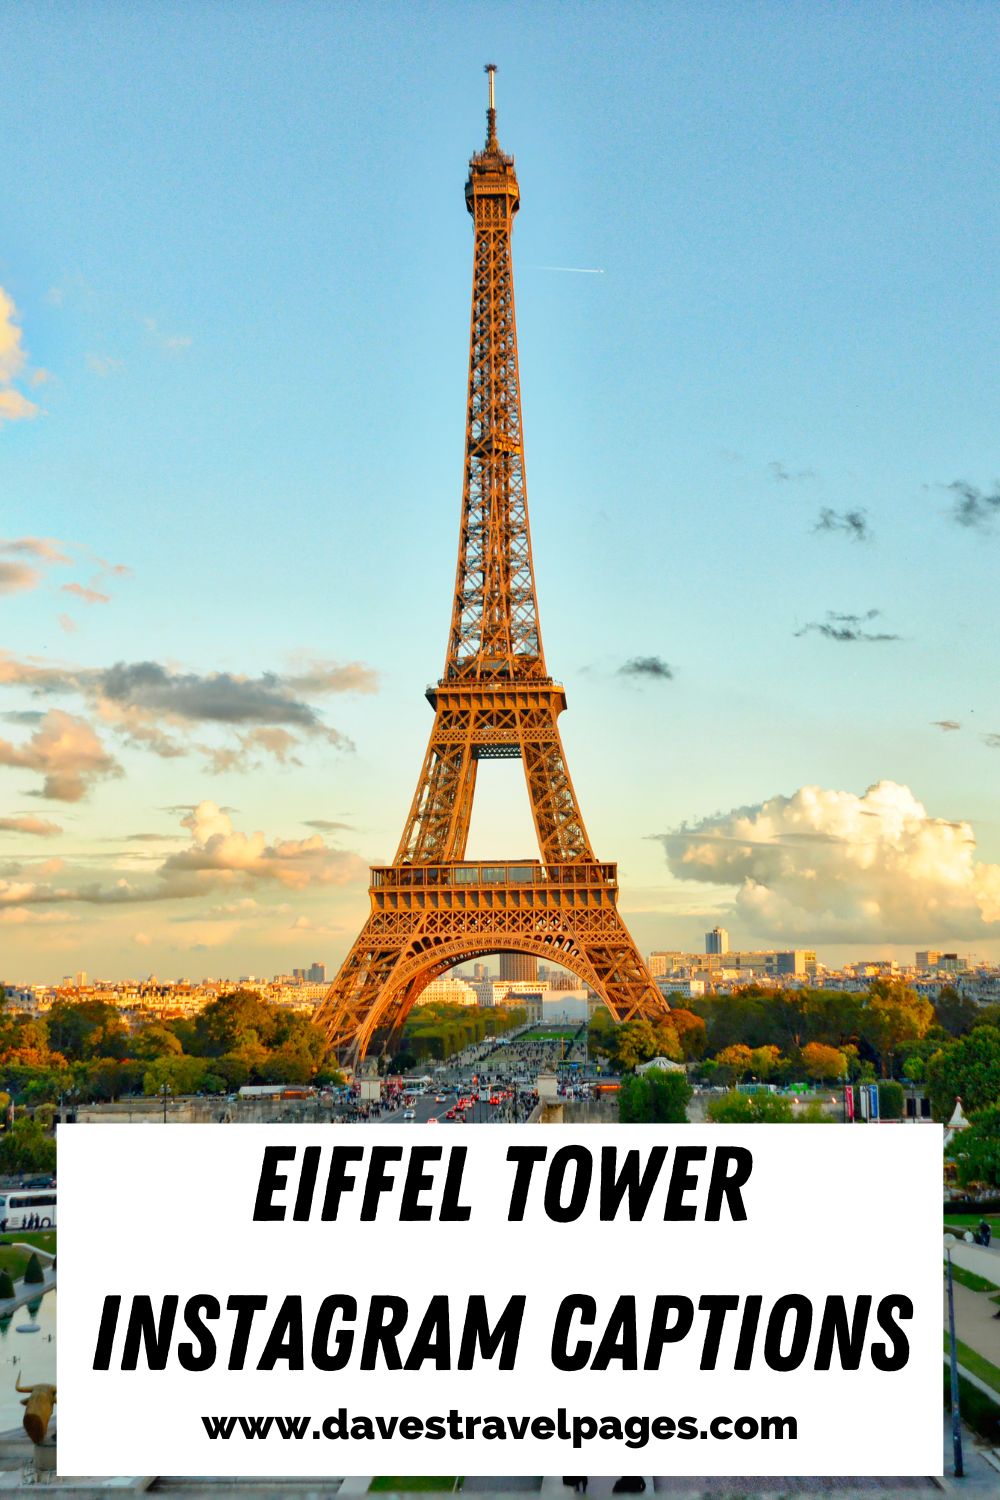 Funny captions and puns about the Eiffel Tower